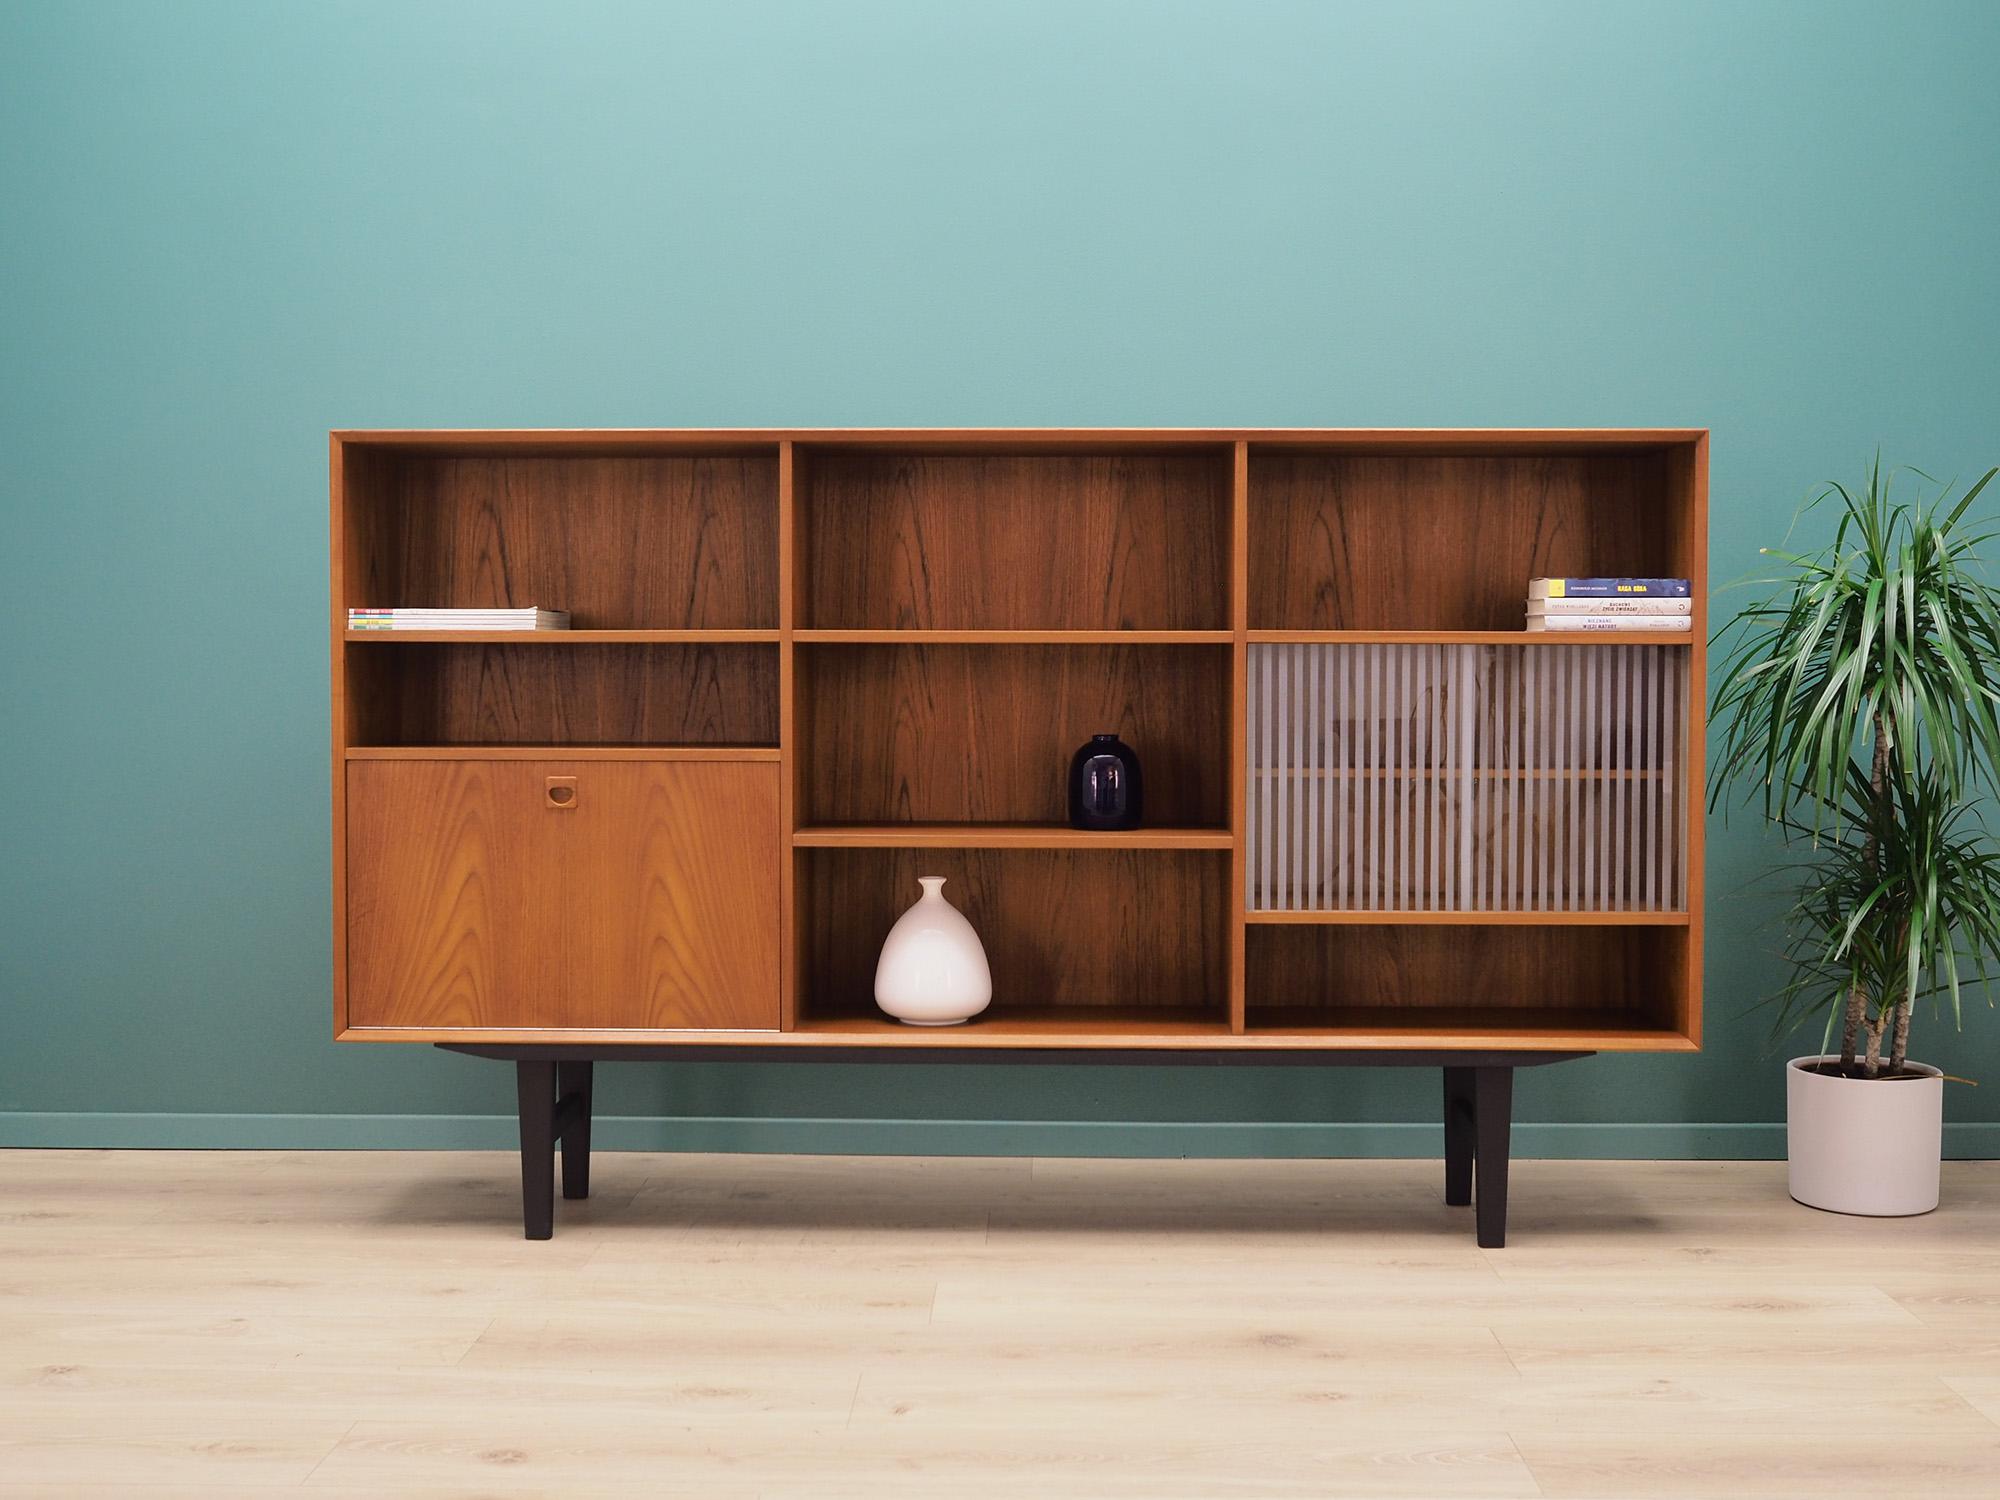 Highboard was made in the 1970s, Danish production.

Structure is covered with teak veneer. Legs made of solid wood stained black. Surface after refreshing. Inside the space has been filled with practical shelves, the lower middle shelf is